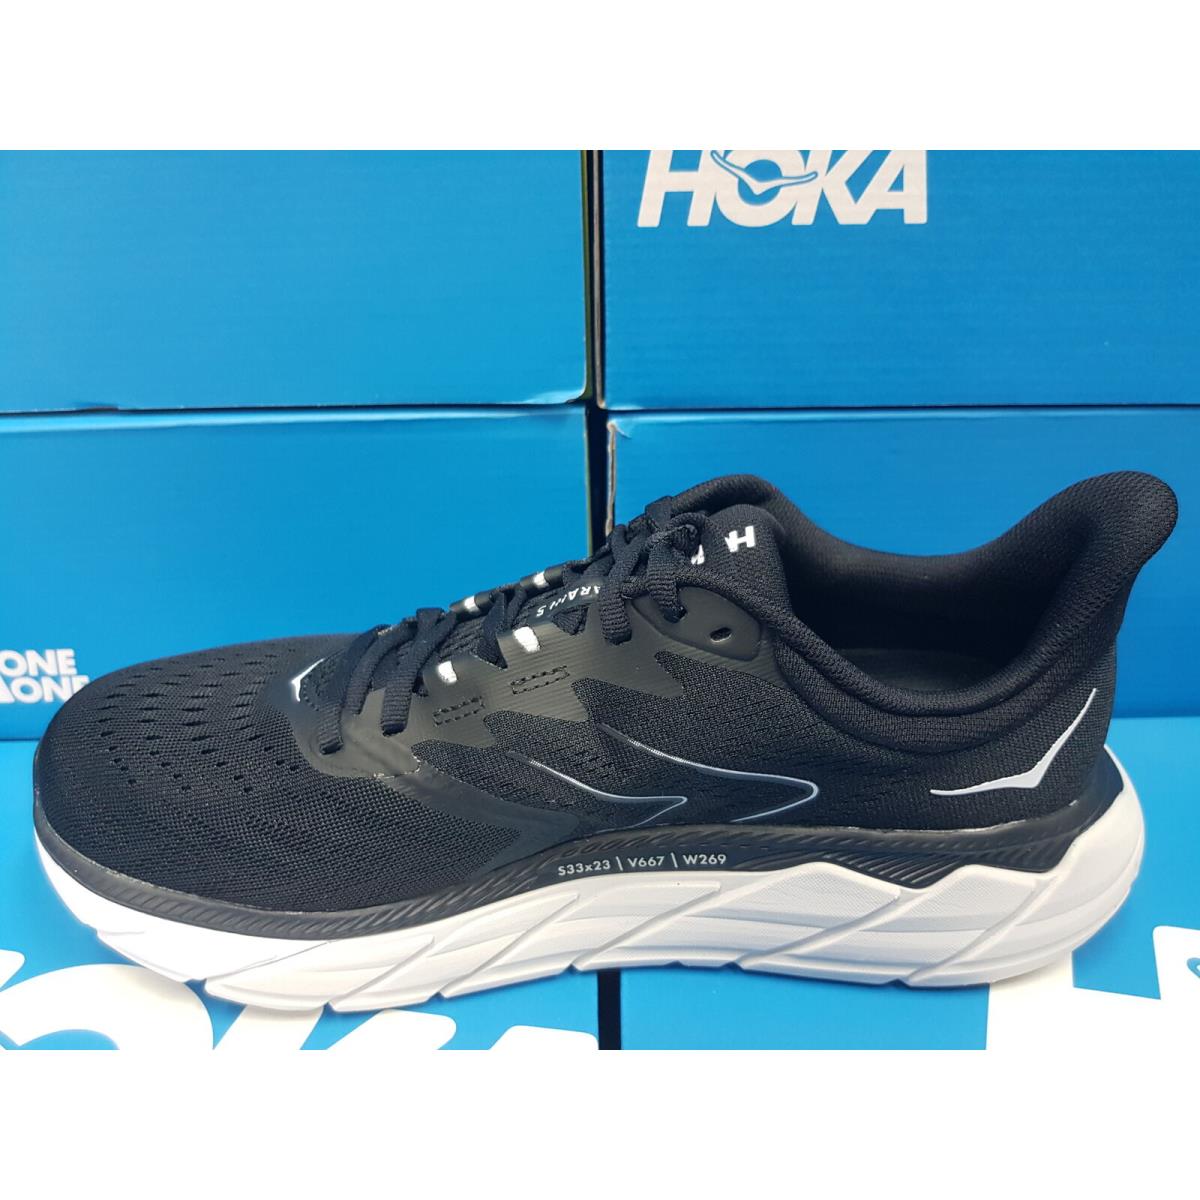 Hoka One One Arahi 5 Wide 2E 1115011/BWHT Stability Running Shoes For Men